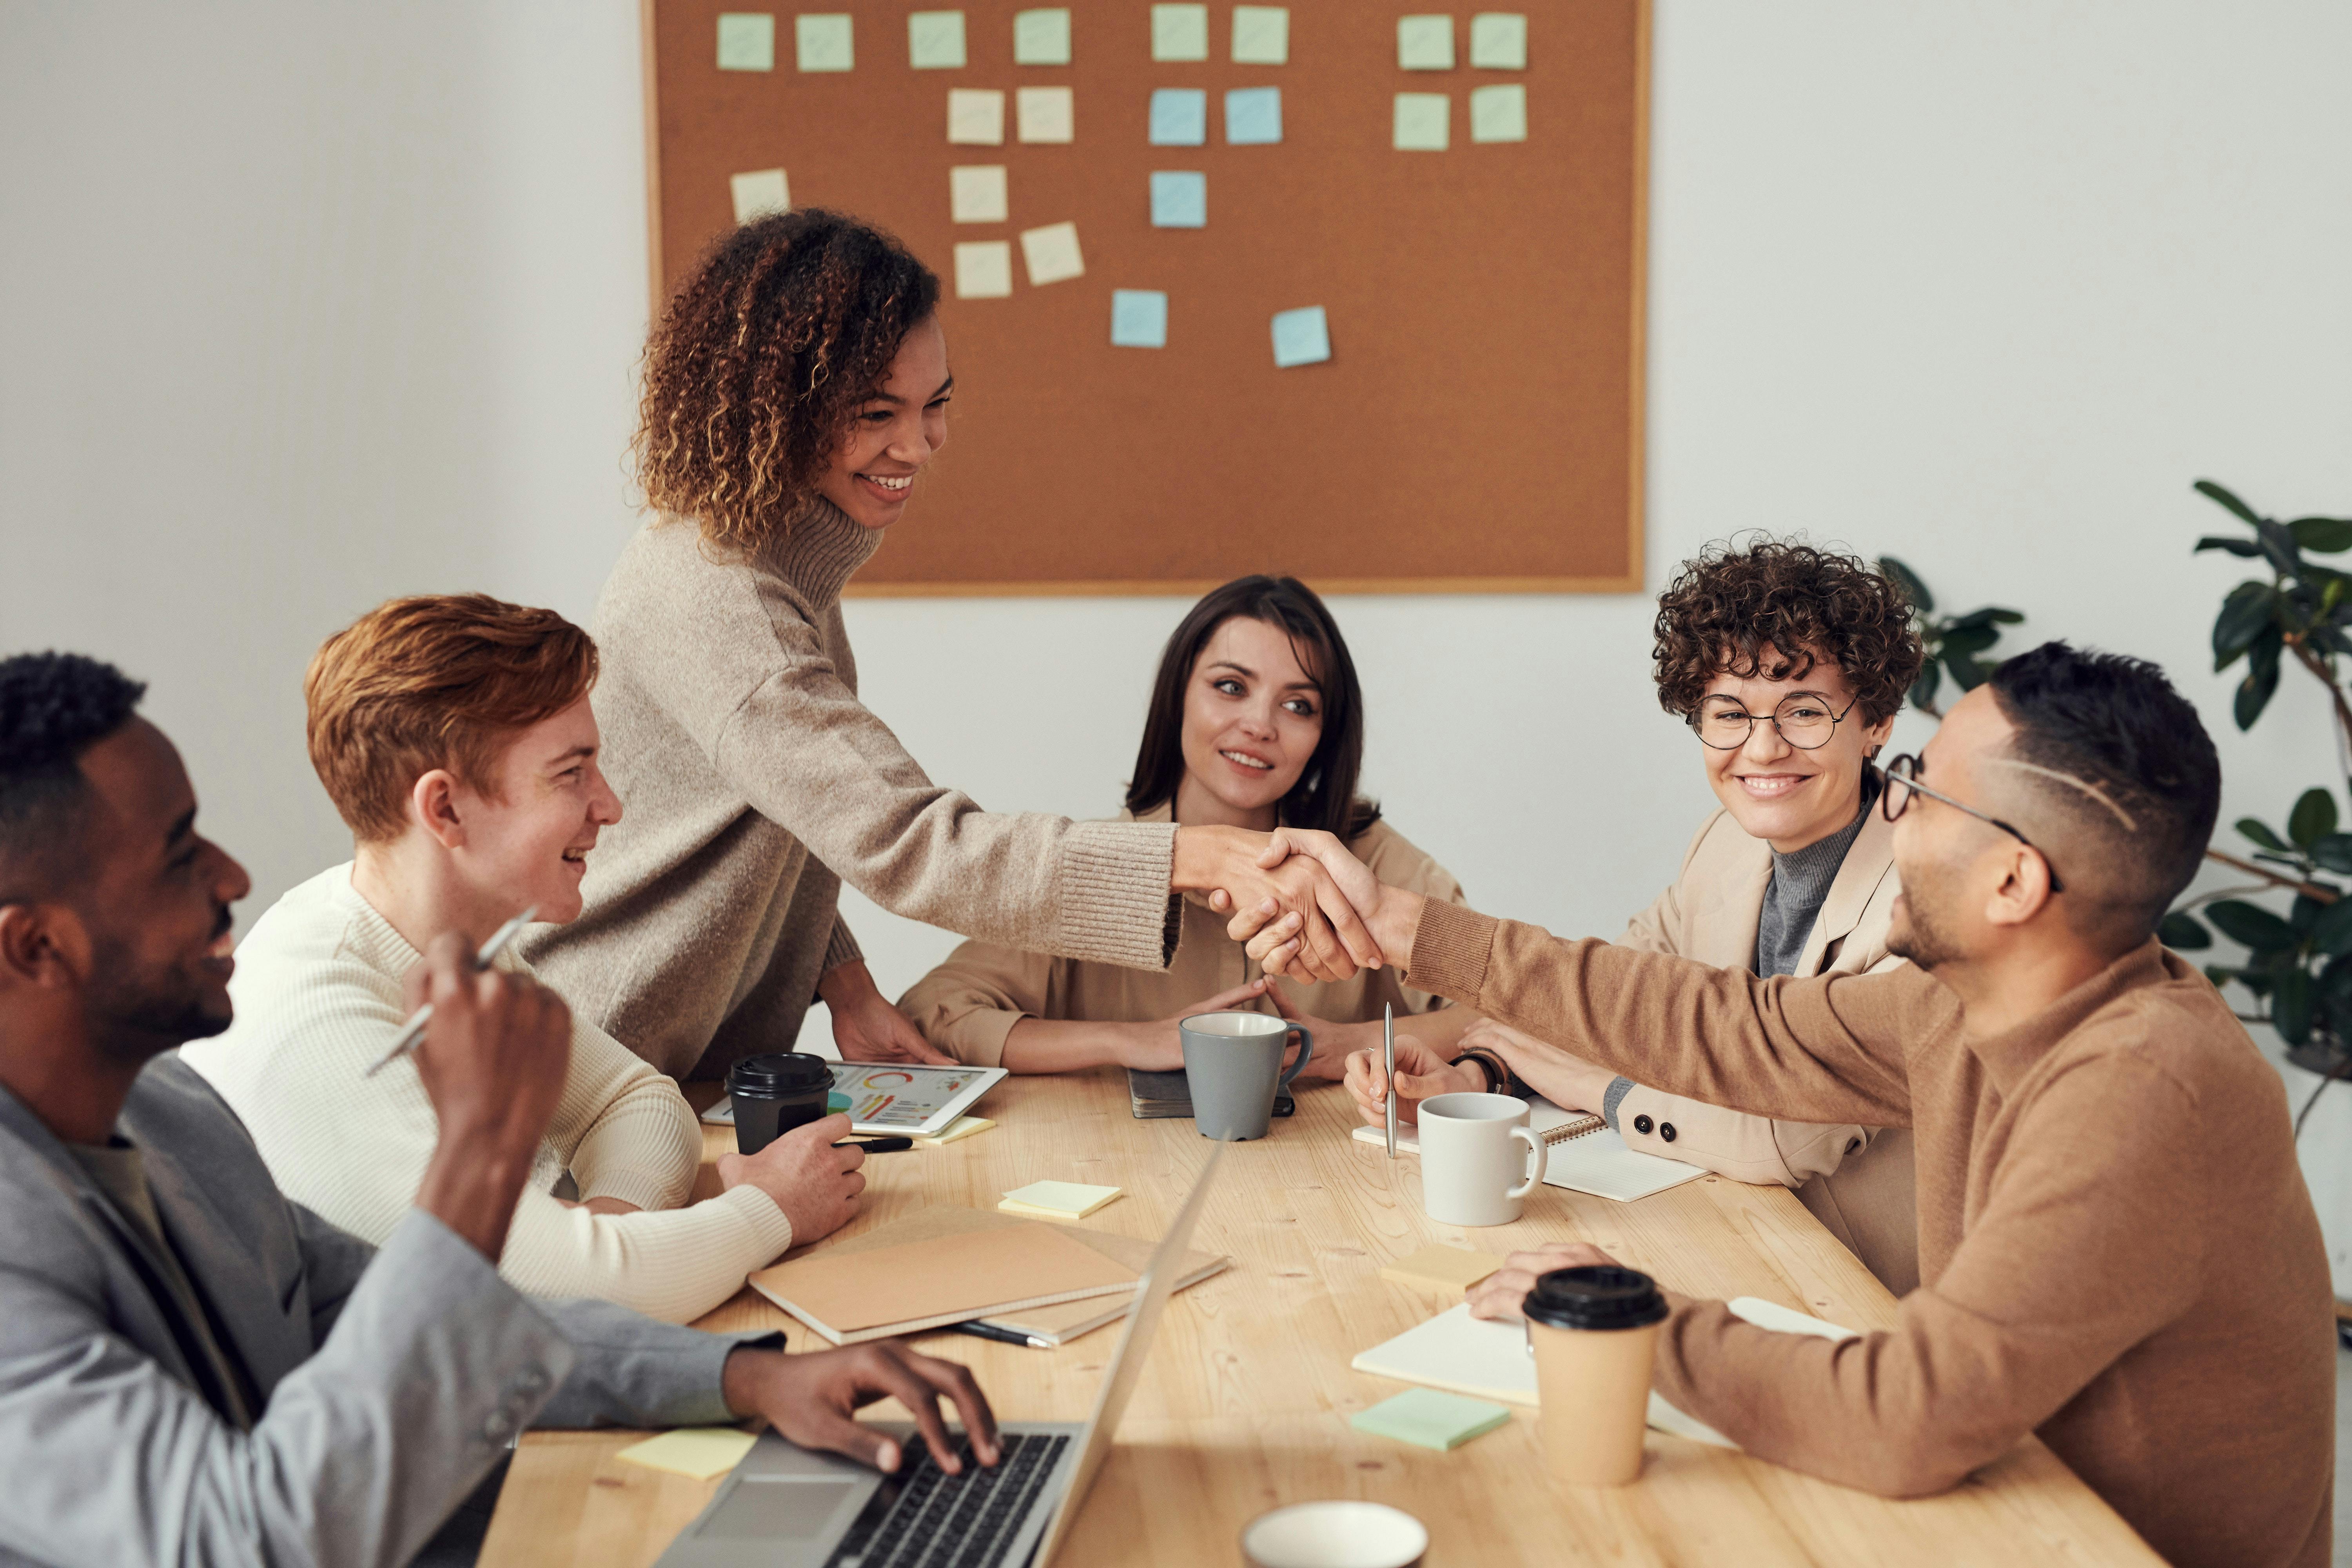 a meeting of 6 people in an organisation, 2 people are shaking hands and communicating